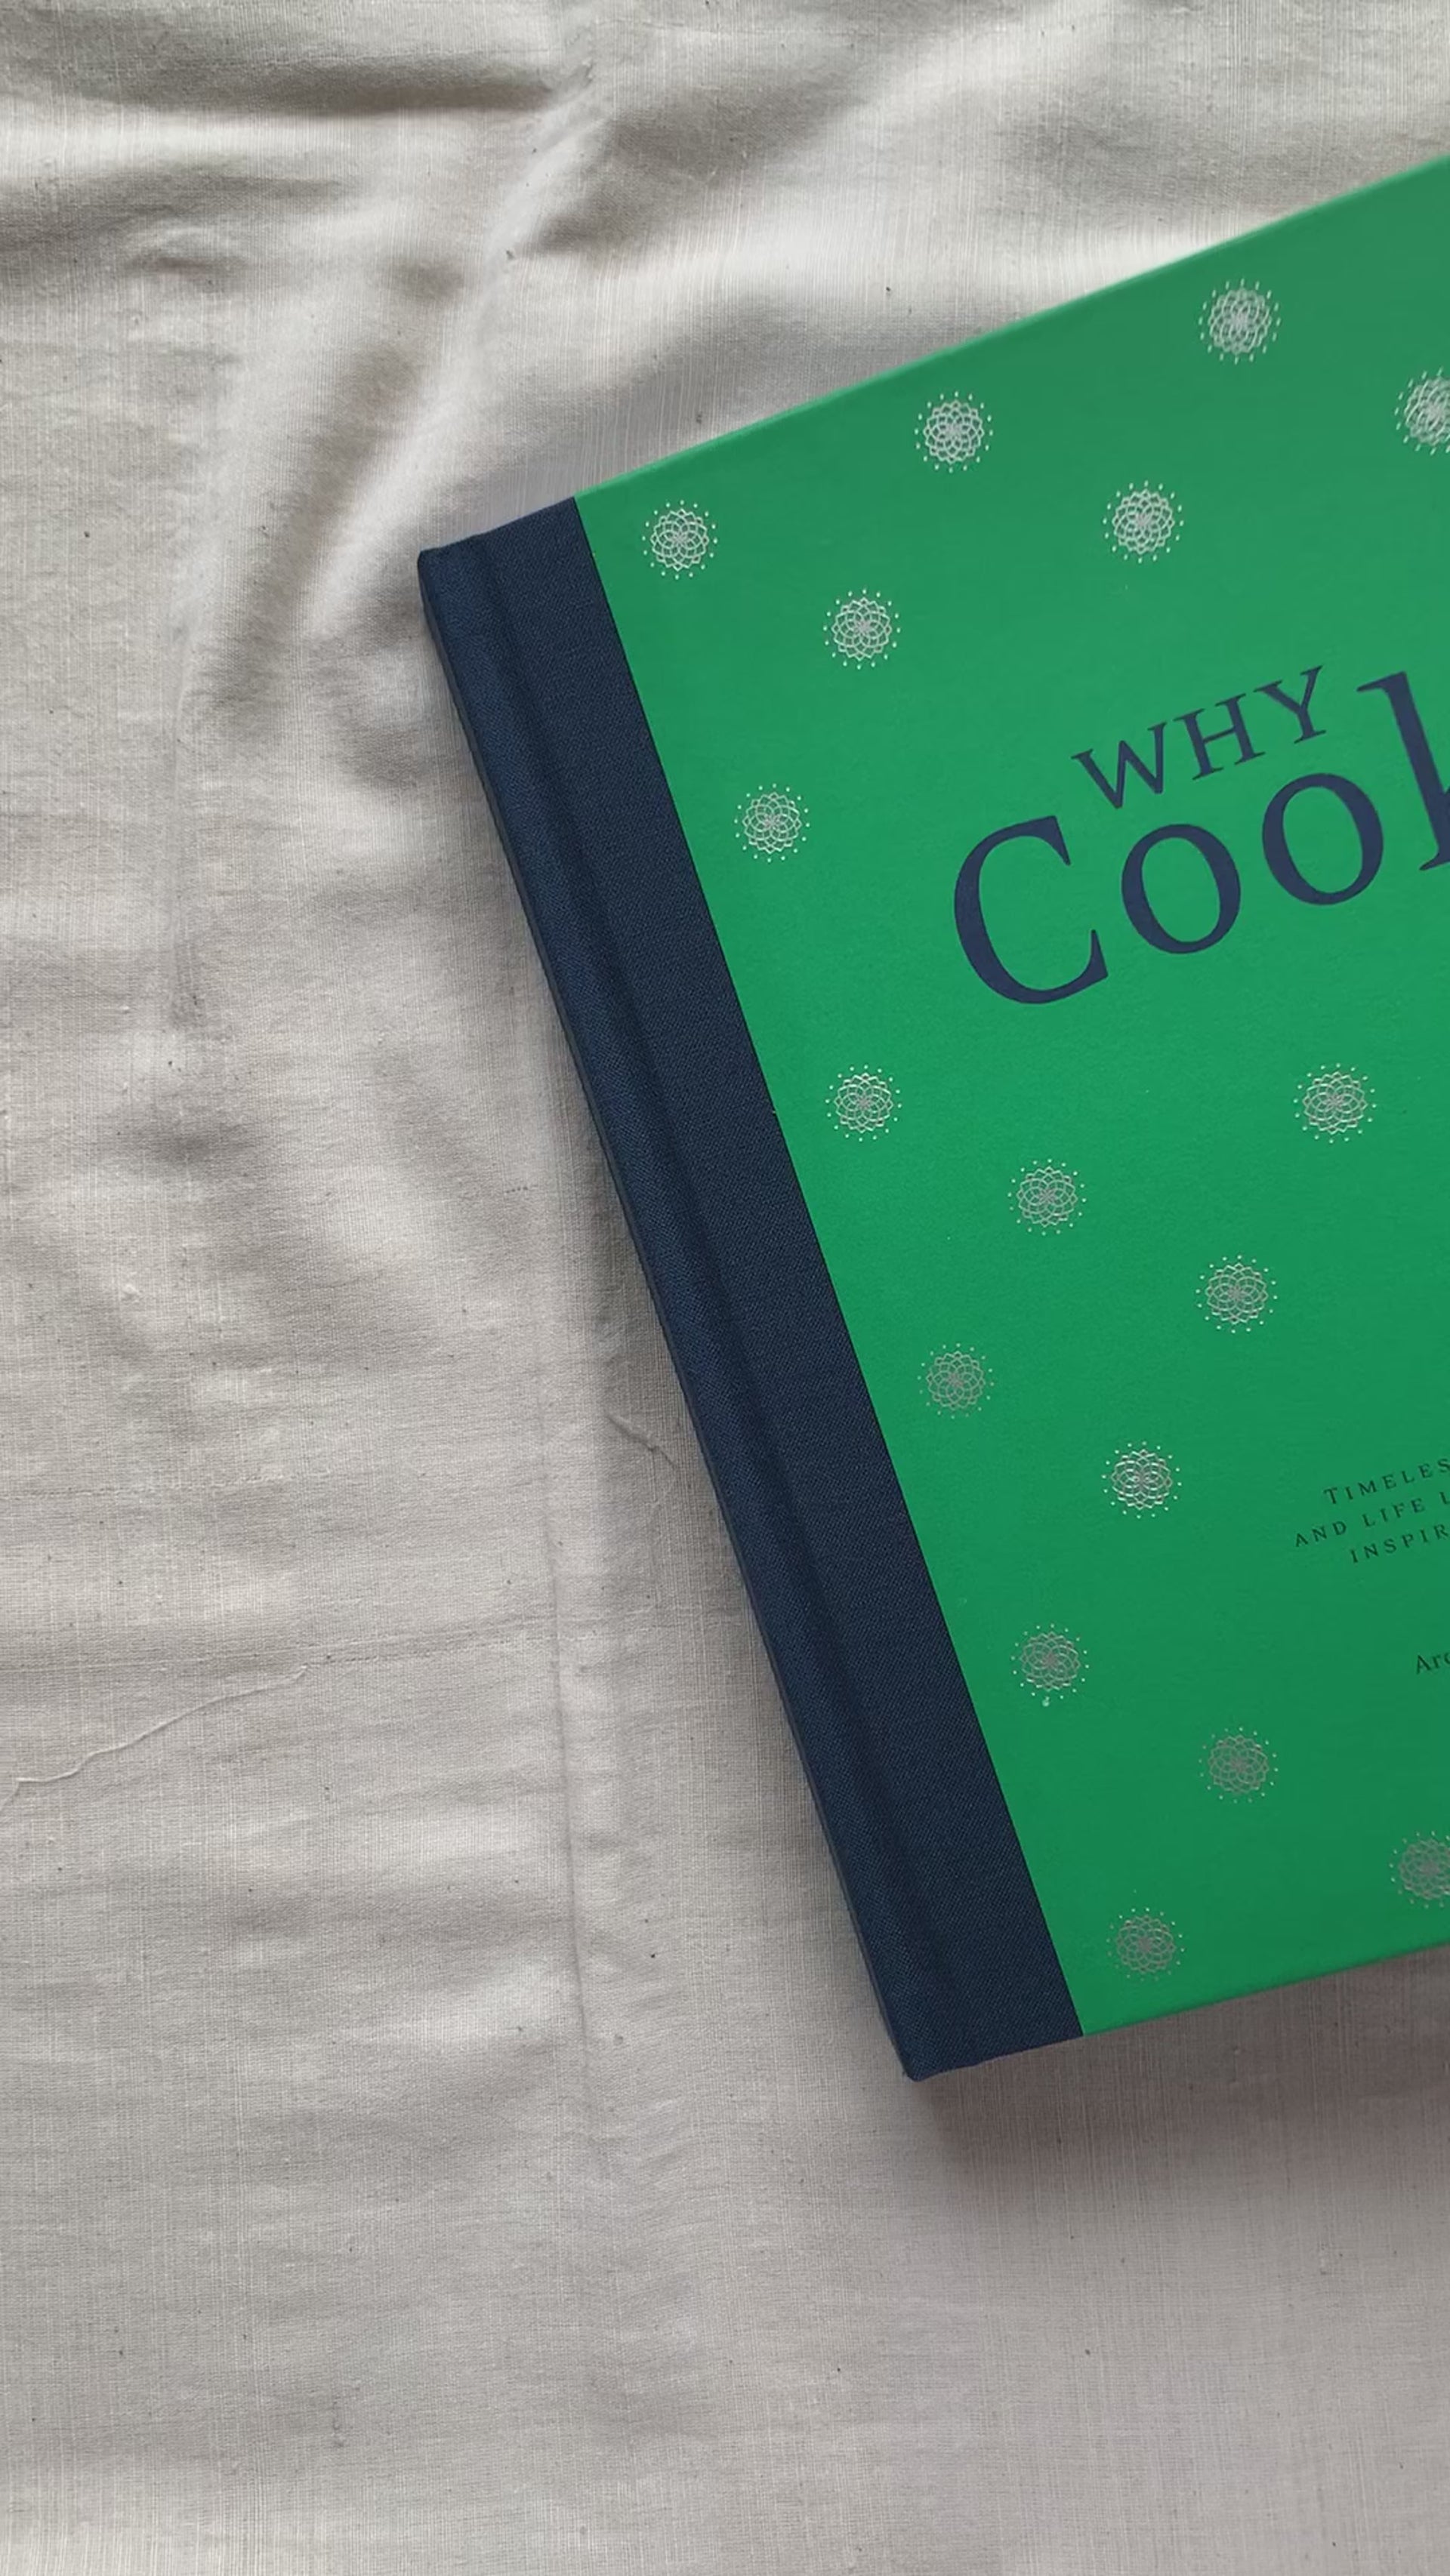 Why Cook: Timeless recipes and life lessons from inspiring women